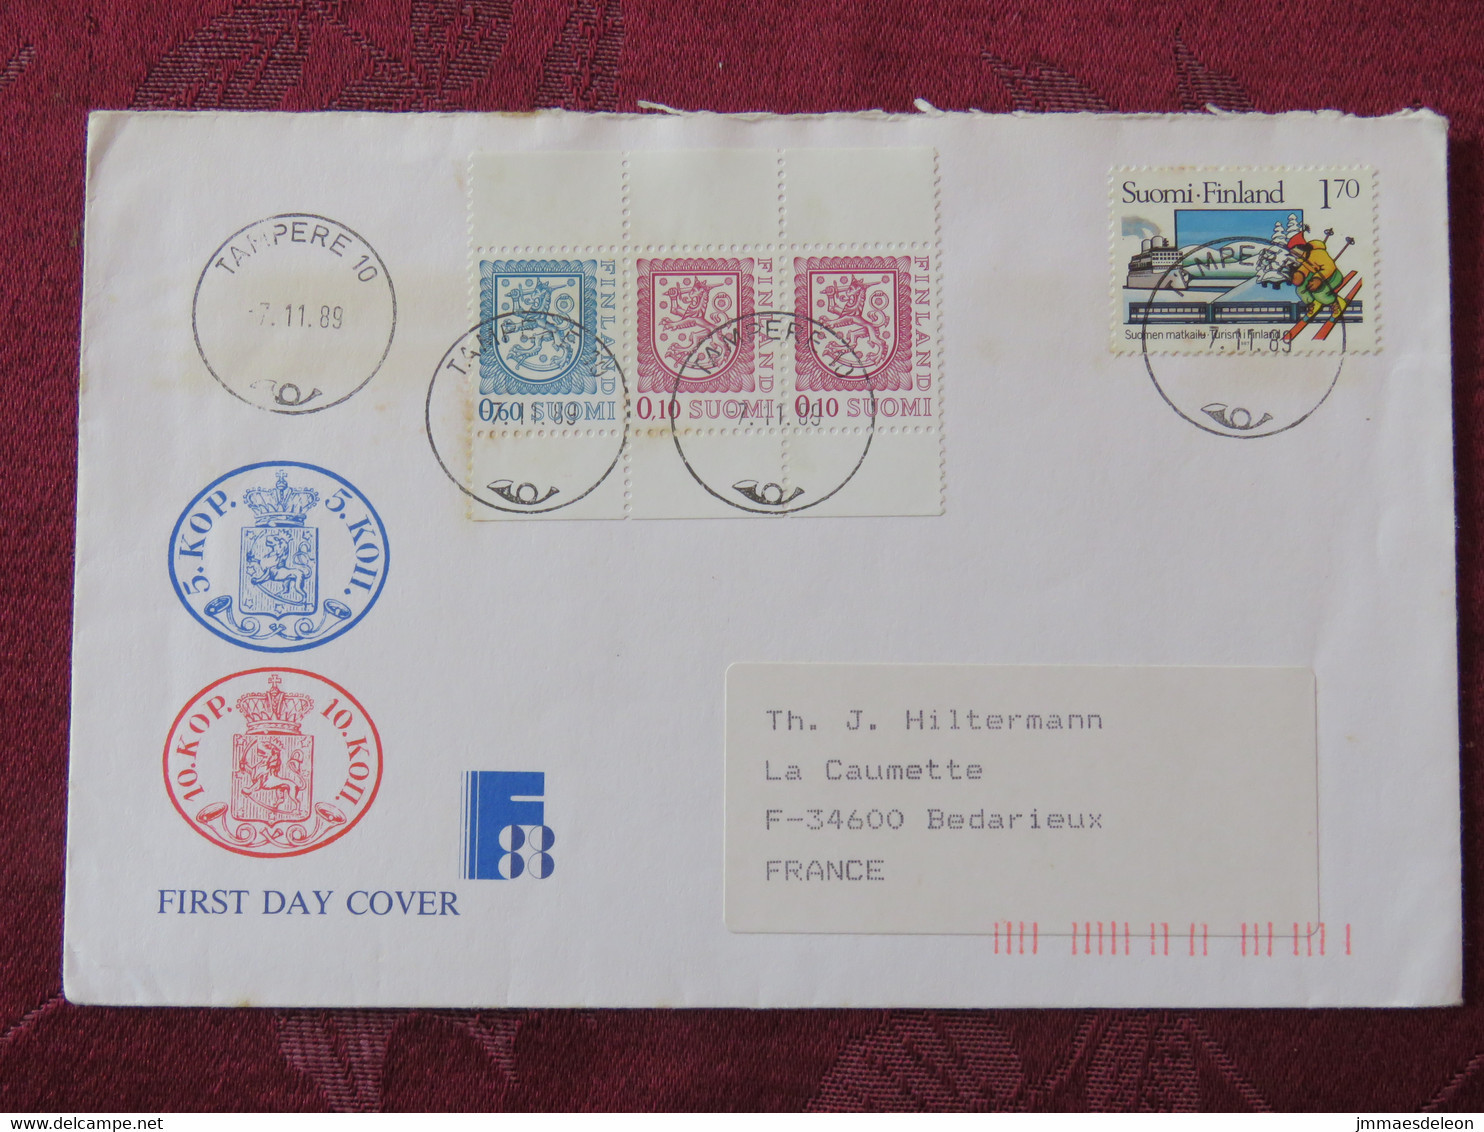 Finland 1989 FDC Cover To France - Nordic Cooperation - Lions Arms From Booklet - Ski - Ship - Covers & Documents